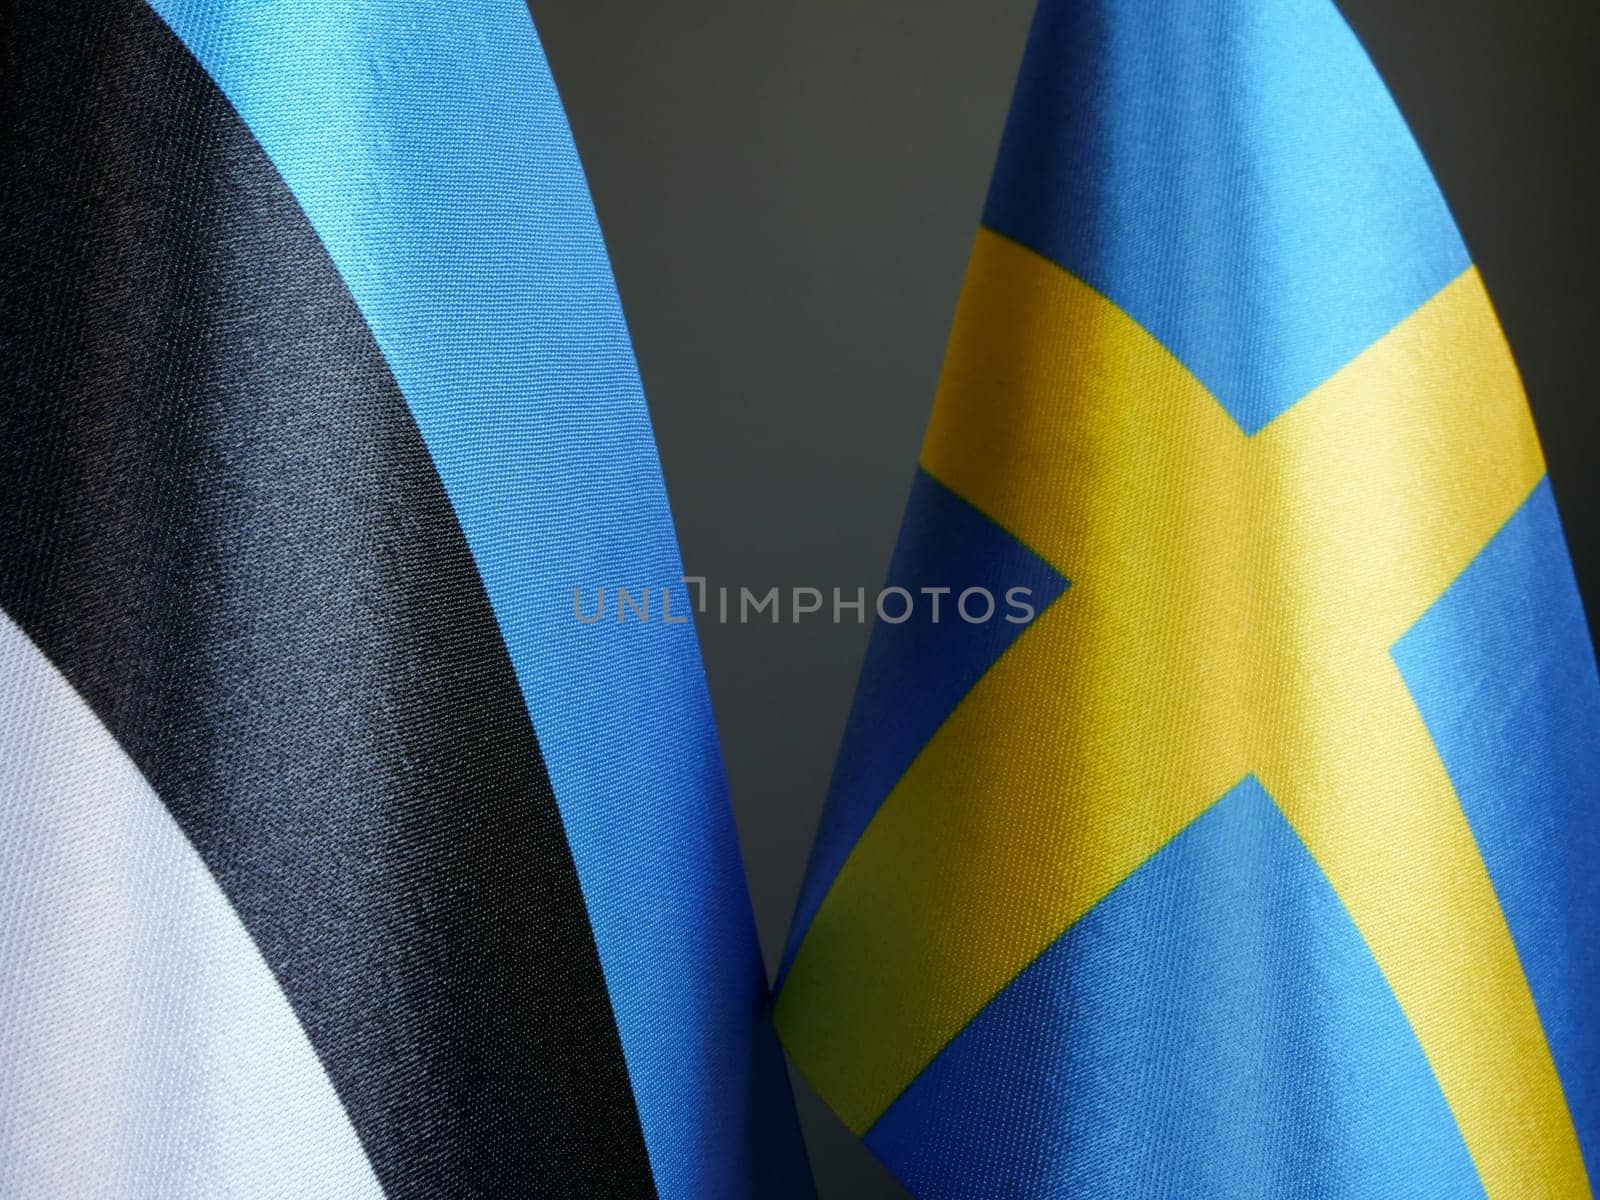 Flags of Estonia and Sweden.